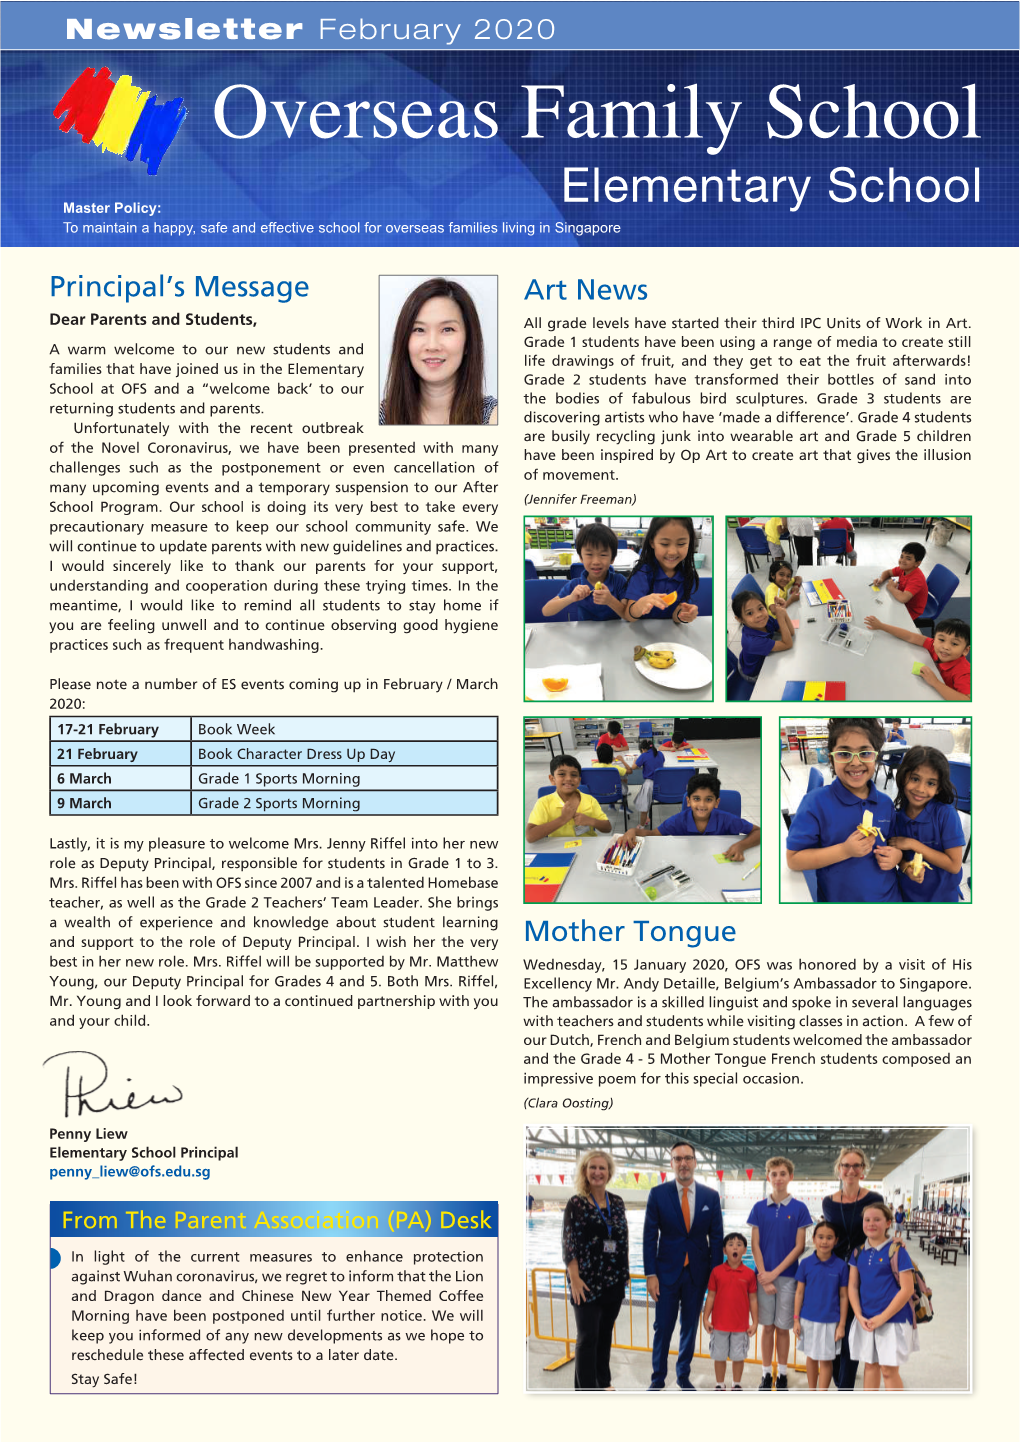 Elementary School Master Policy: to Maintain a Happy, Safe and Effective School for Overseas Families Living in Singapore